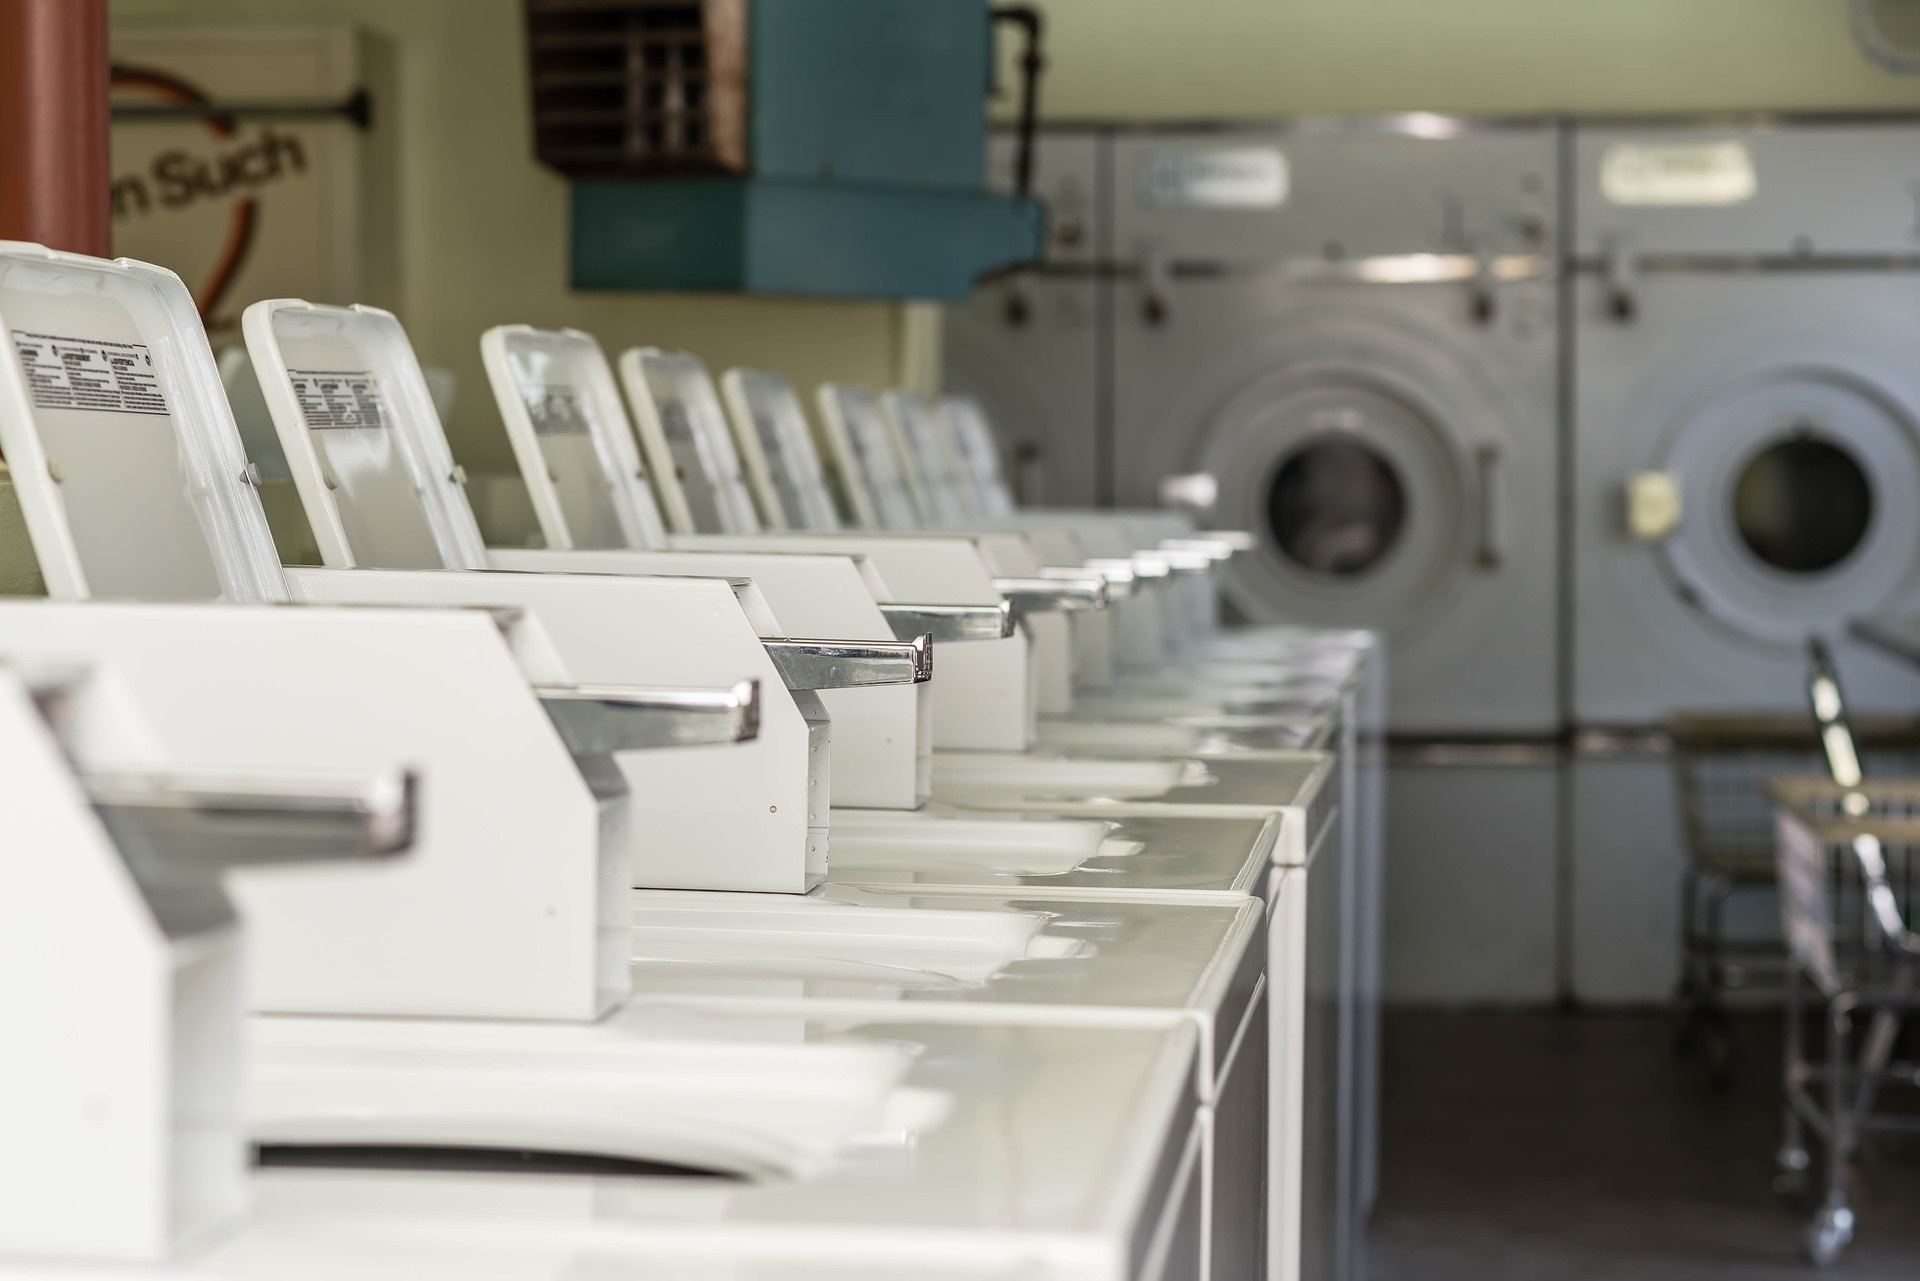 Brooklyn Laundromat Business for sale in New York